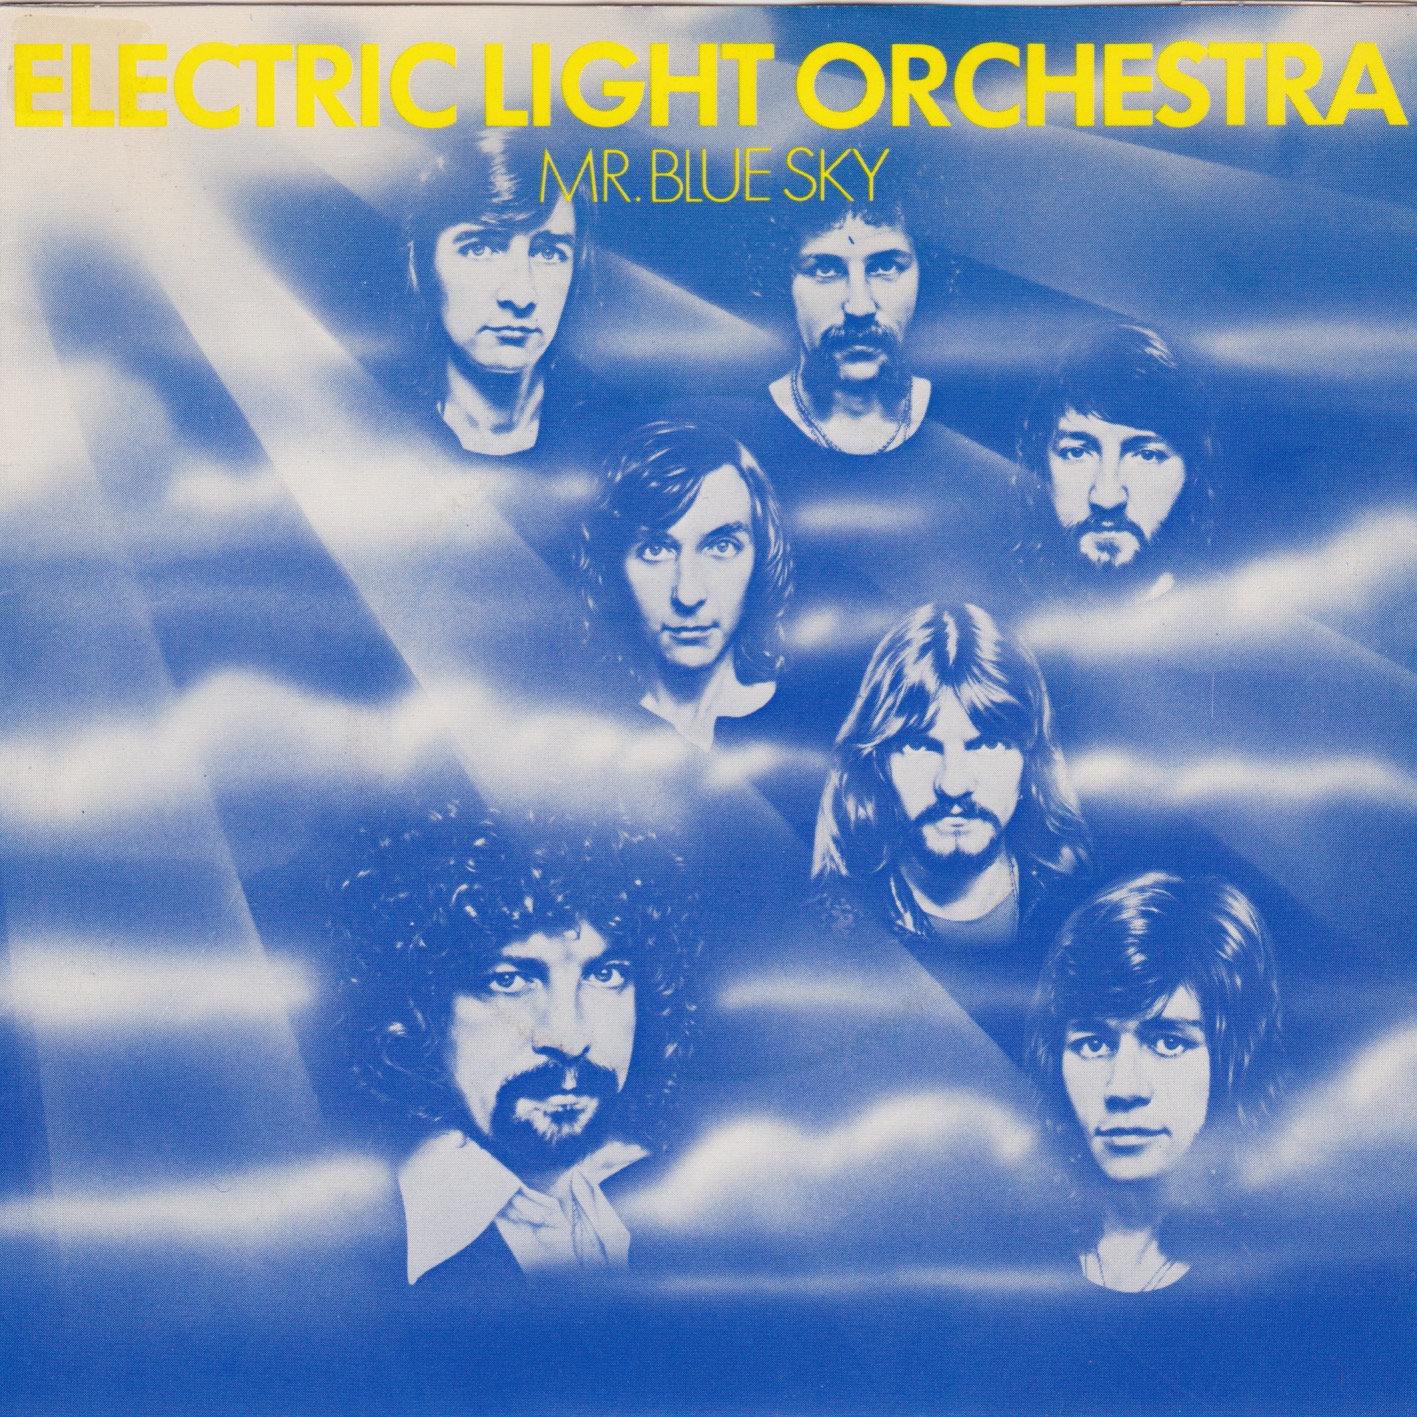 Blue light orchestra. Electric Light Orchestra 1977. Mr. Blue Sky Electric Light Orchestra. Группа Electric Light Orchestra фотоальбомов. Electric Light Orchestra out of the Blue 1977.